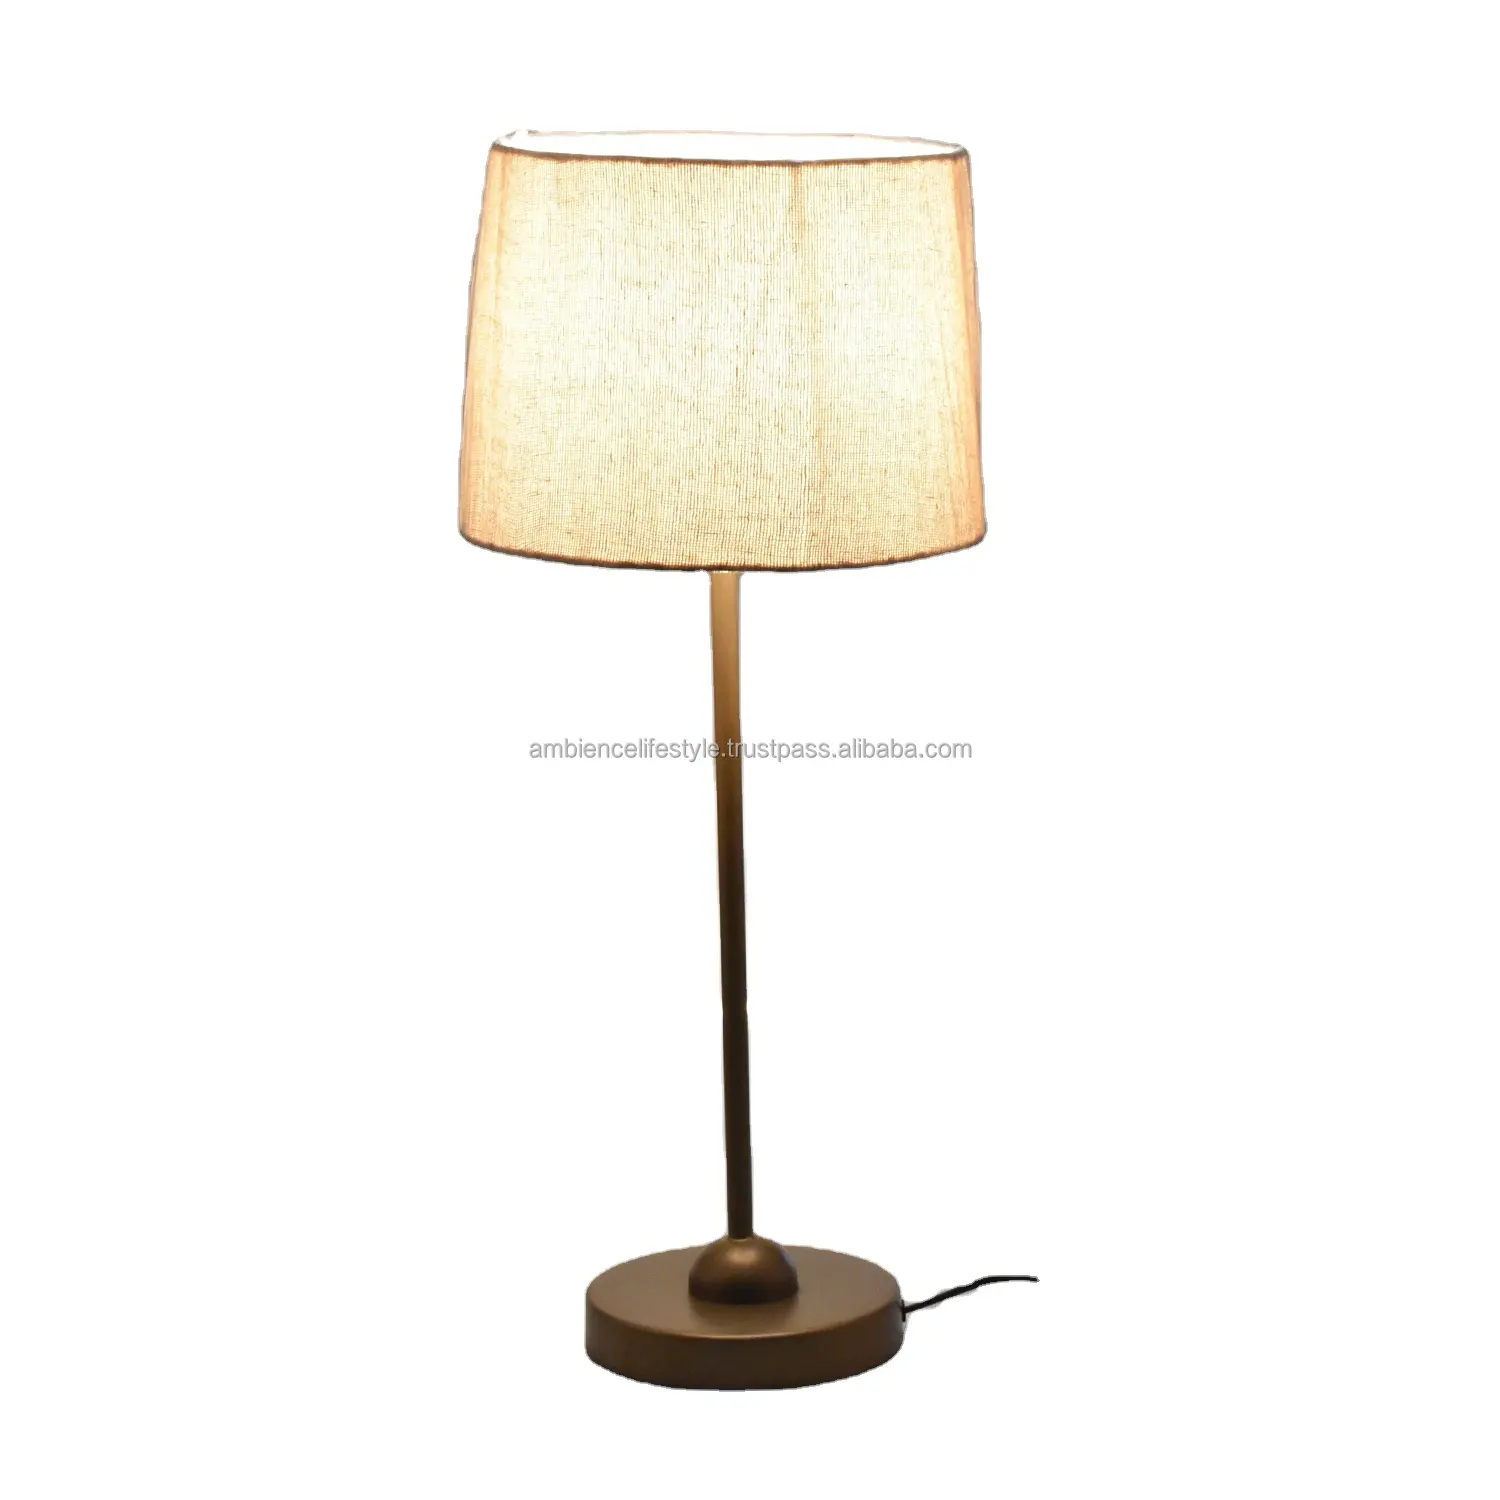 Top Selling Decorative Luxury Gold Powder Coated Table lamp for Home Decoration by Ambience Lifestyle